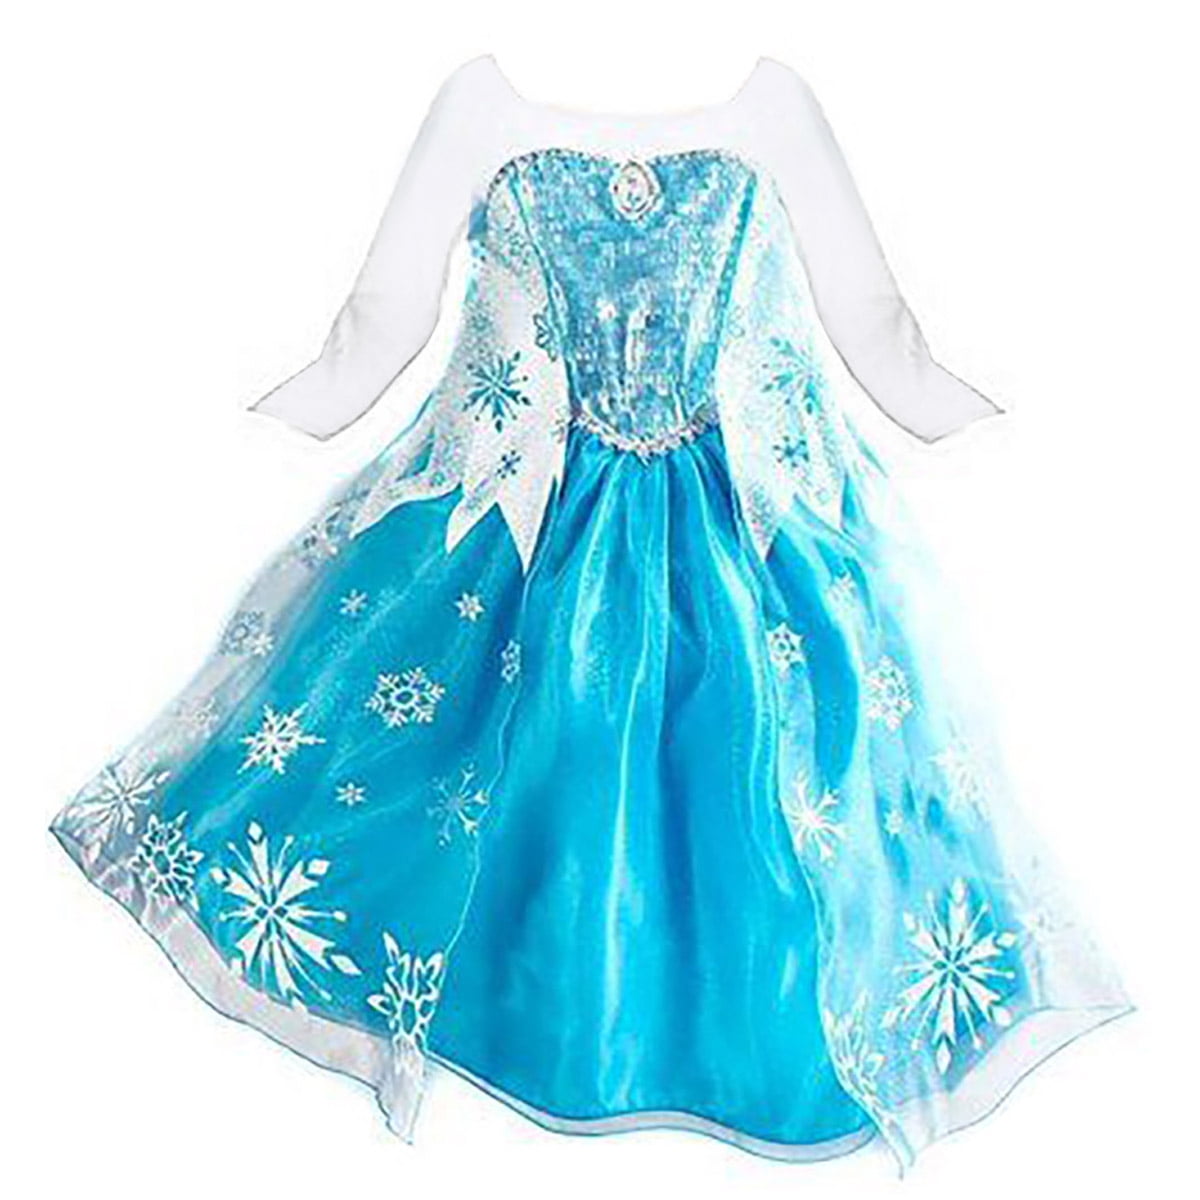 Elsa costumes for sale in Davao City | Facebook Marketplace | Facebook